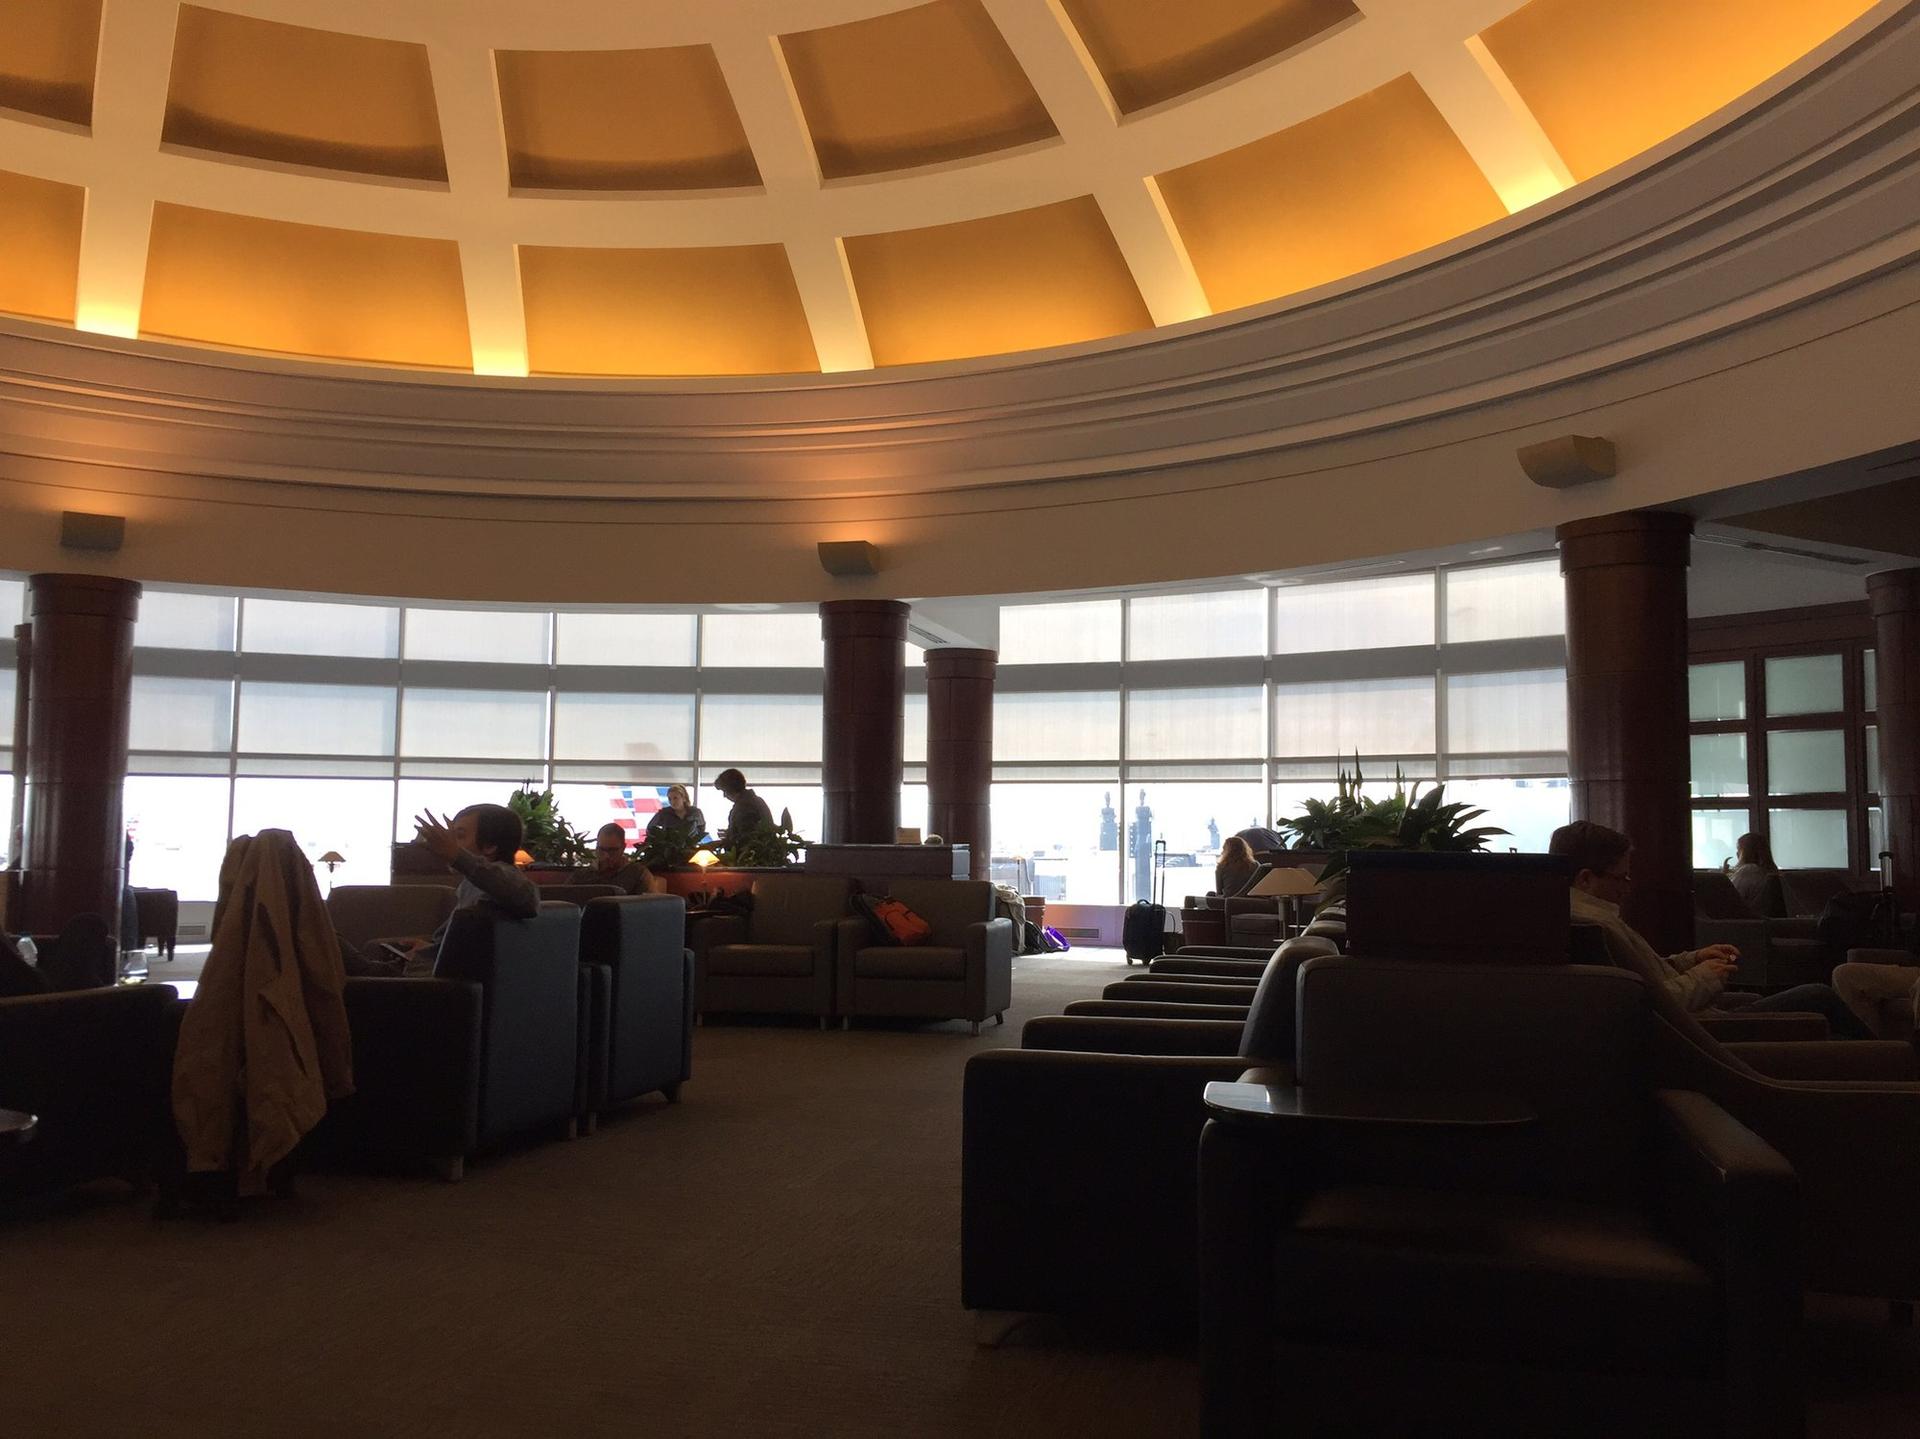 American Airlines Admirals Club image 30 of 37